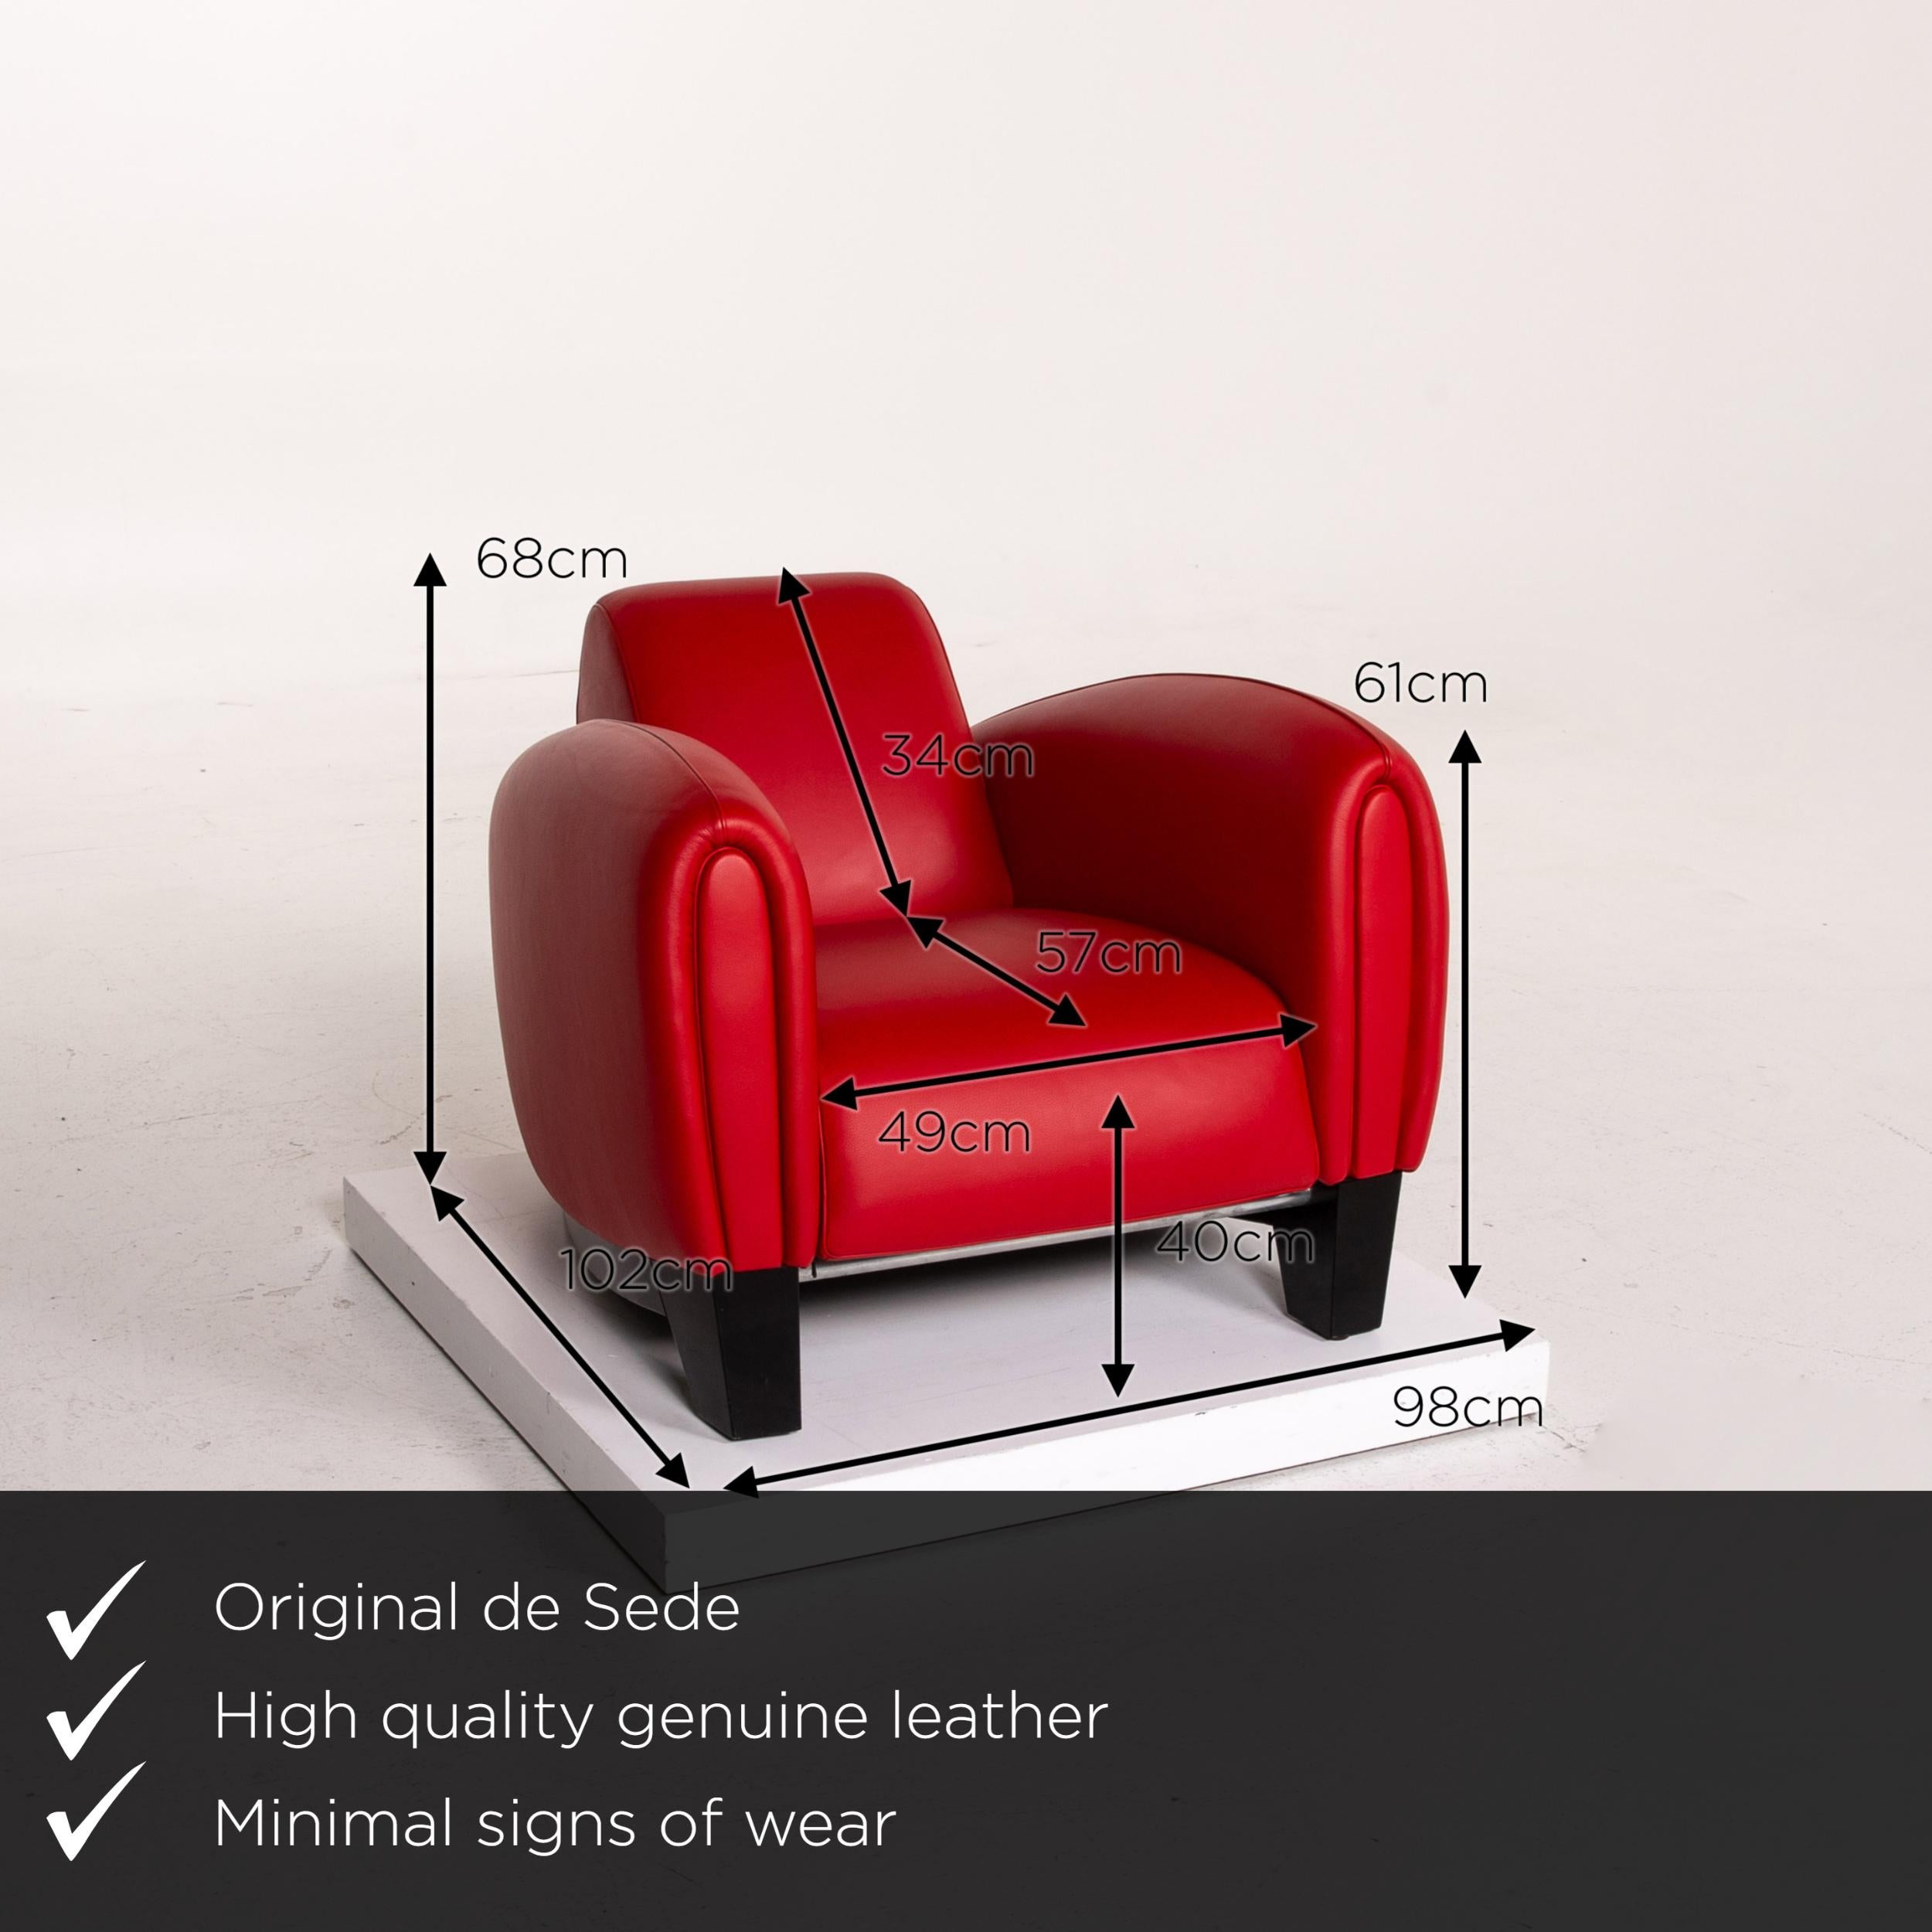 We present to you a De Sede DS 57 leather armchair red.

 

 Product measurements in centimeters:
 

Depth 102
Width 98
Height 68
Seat height 40
Rest height 61
Seat depth 57
Seat width 49
Back height 34.